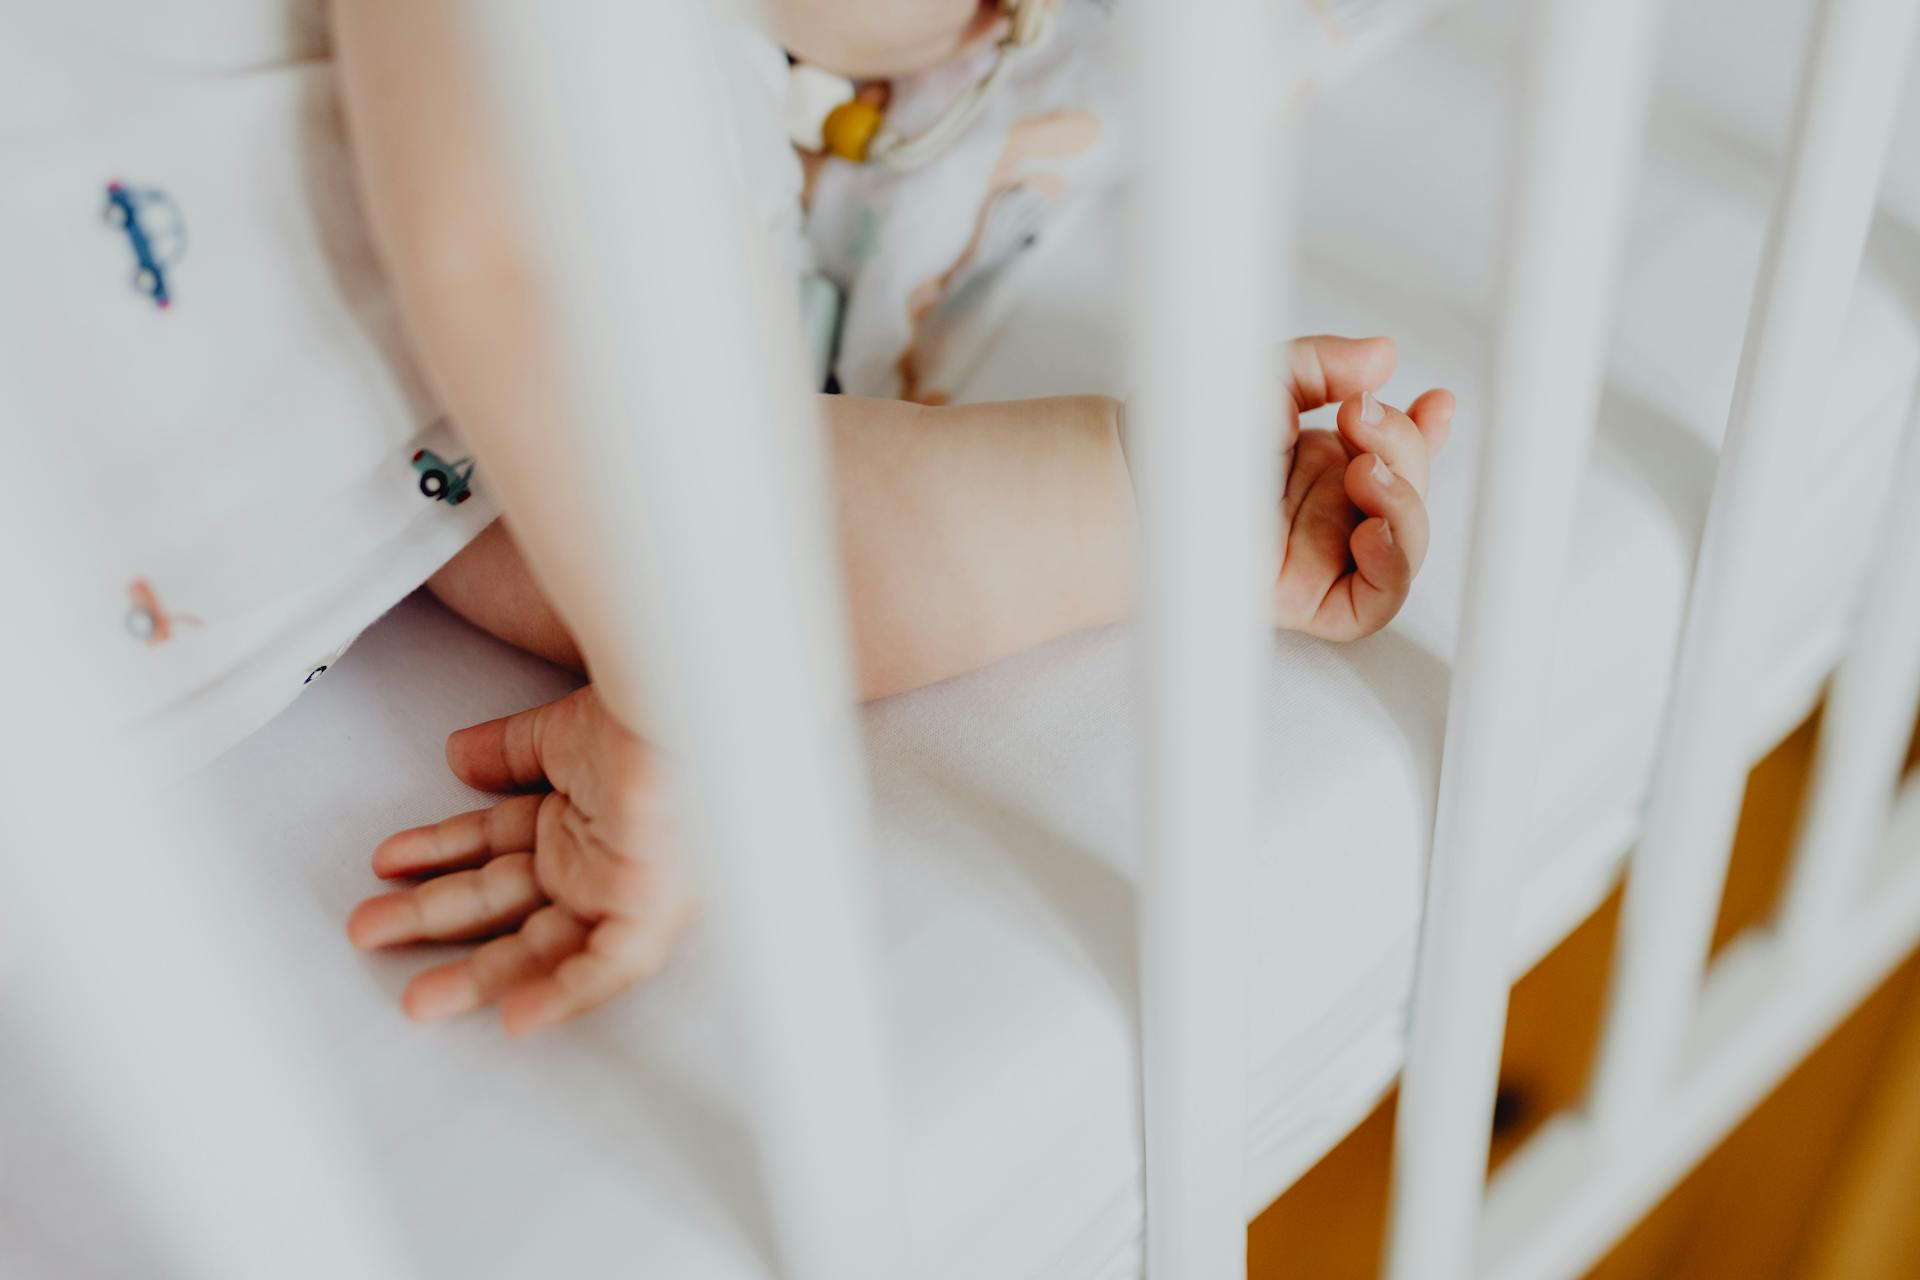 A baby in a crib | Source: Pexels